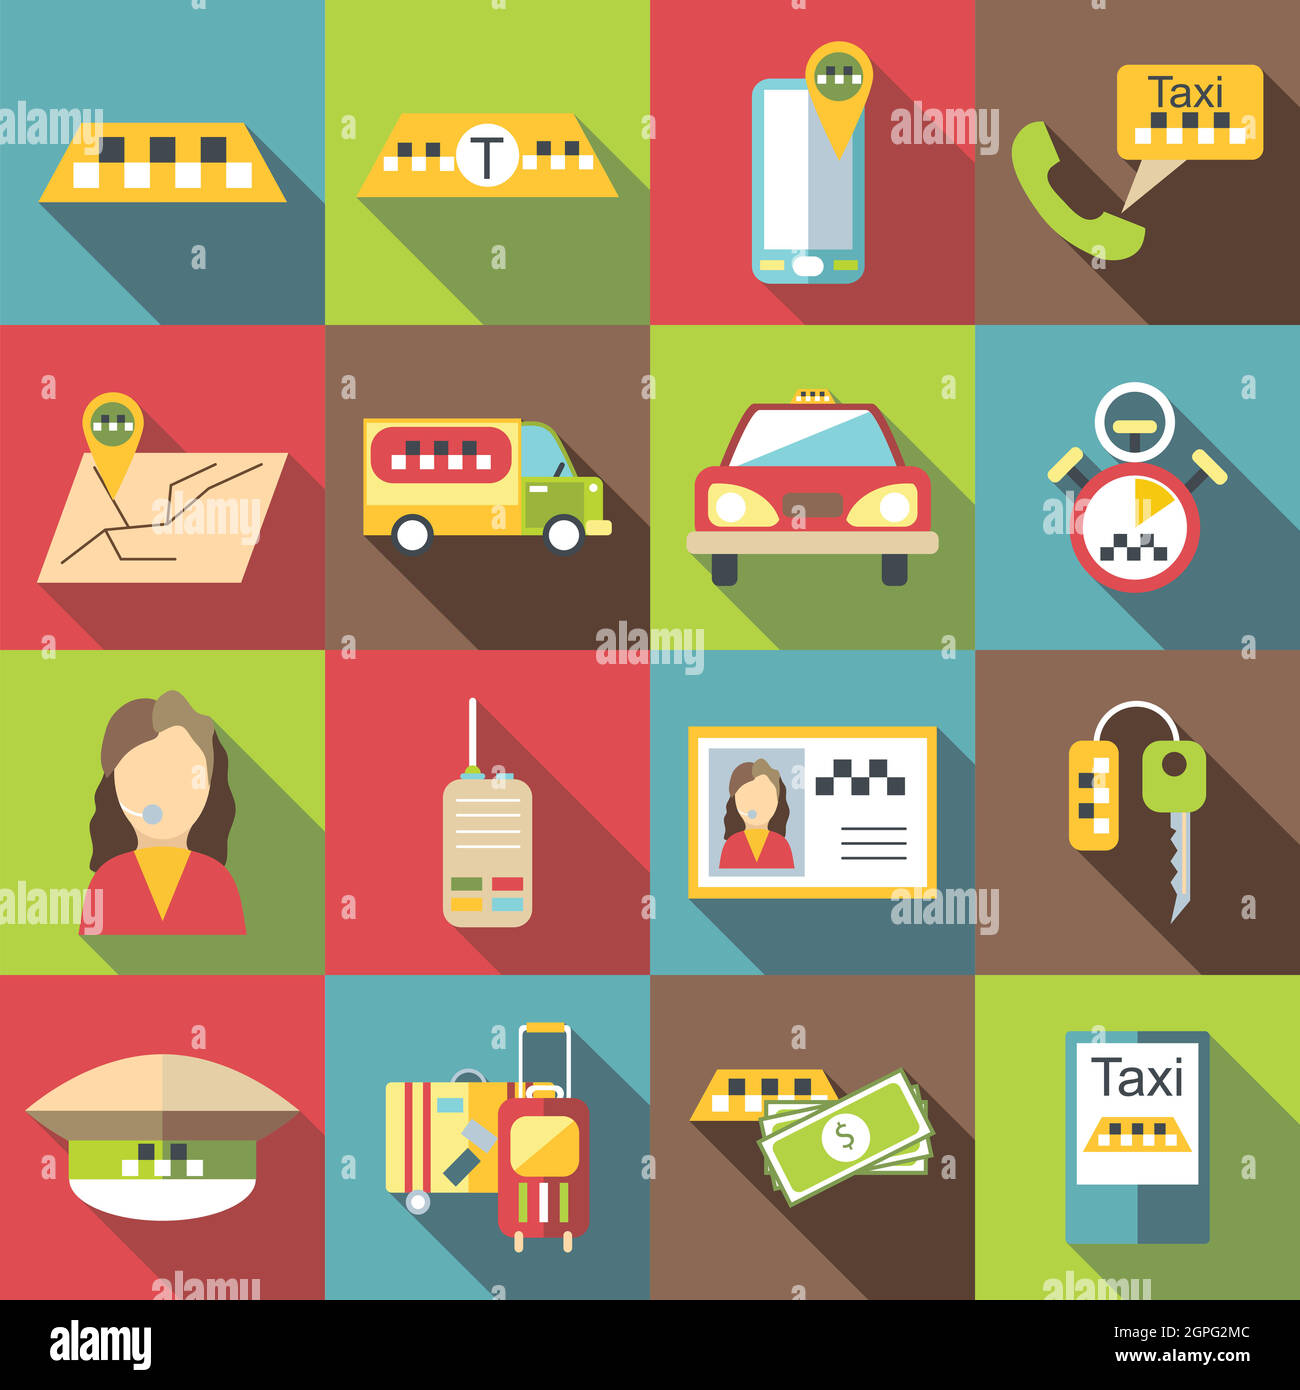 Taxi service icons set, flat style Stock Vector